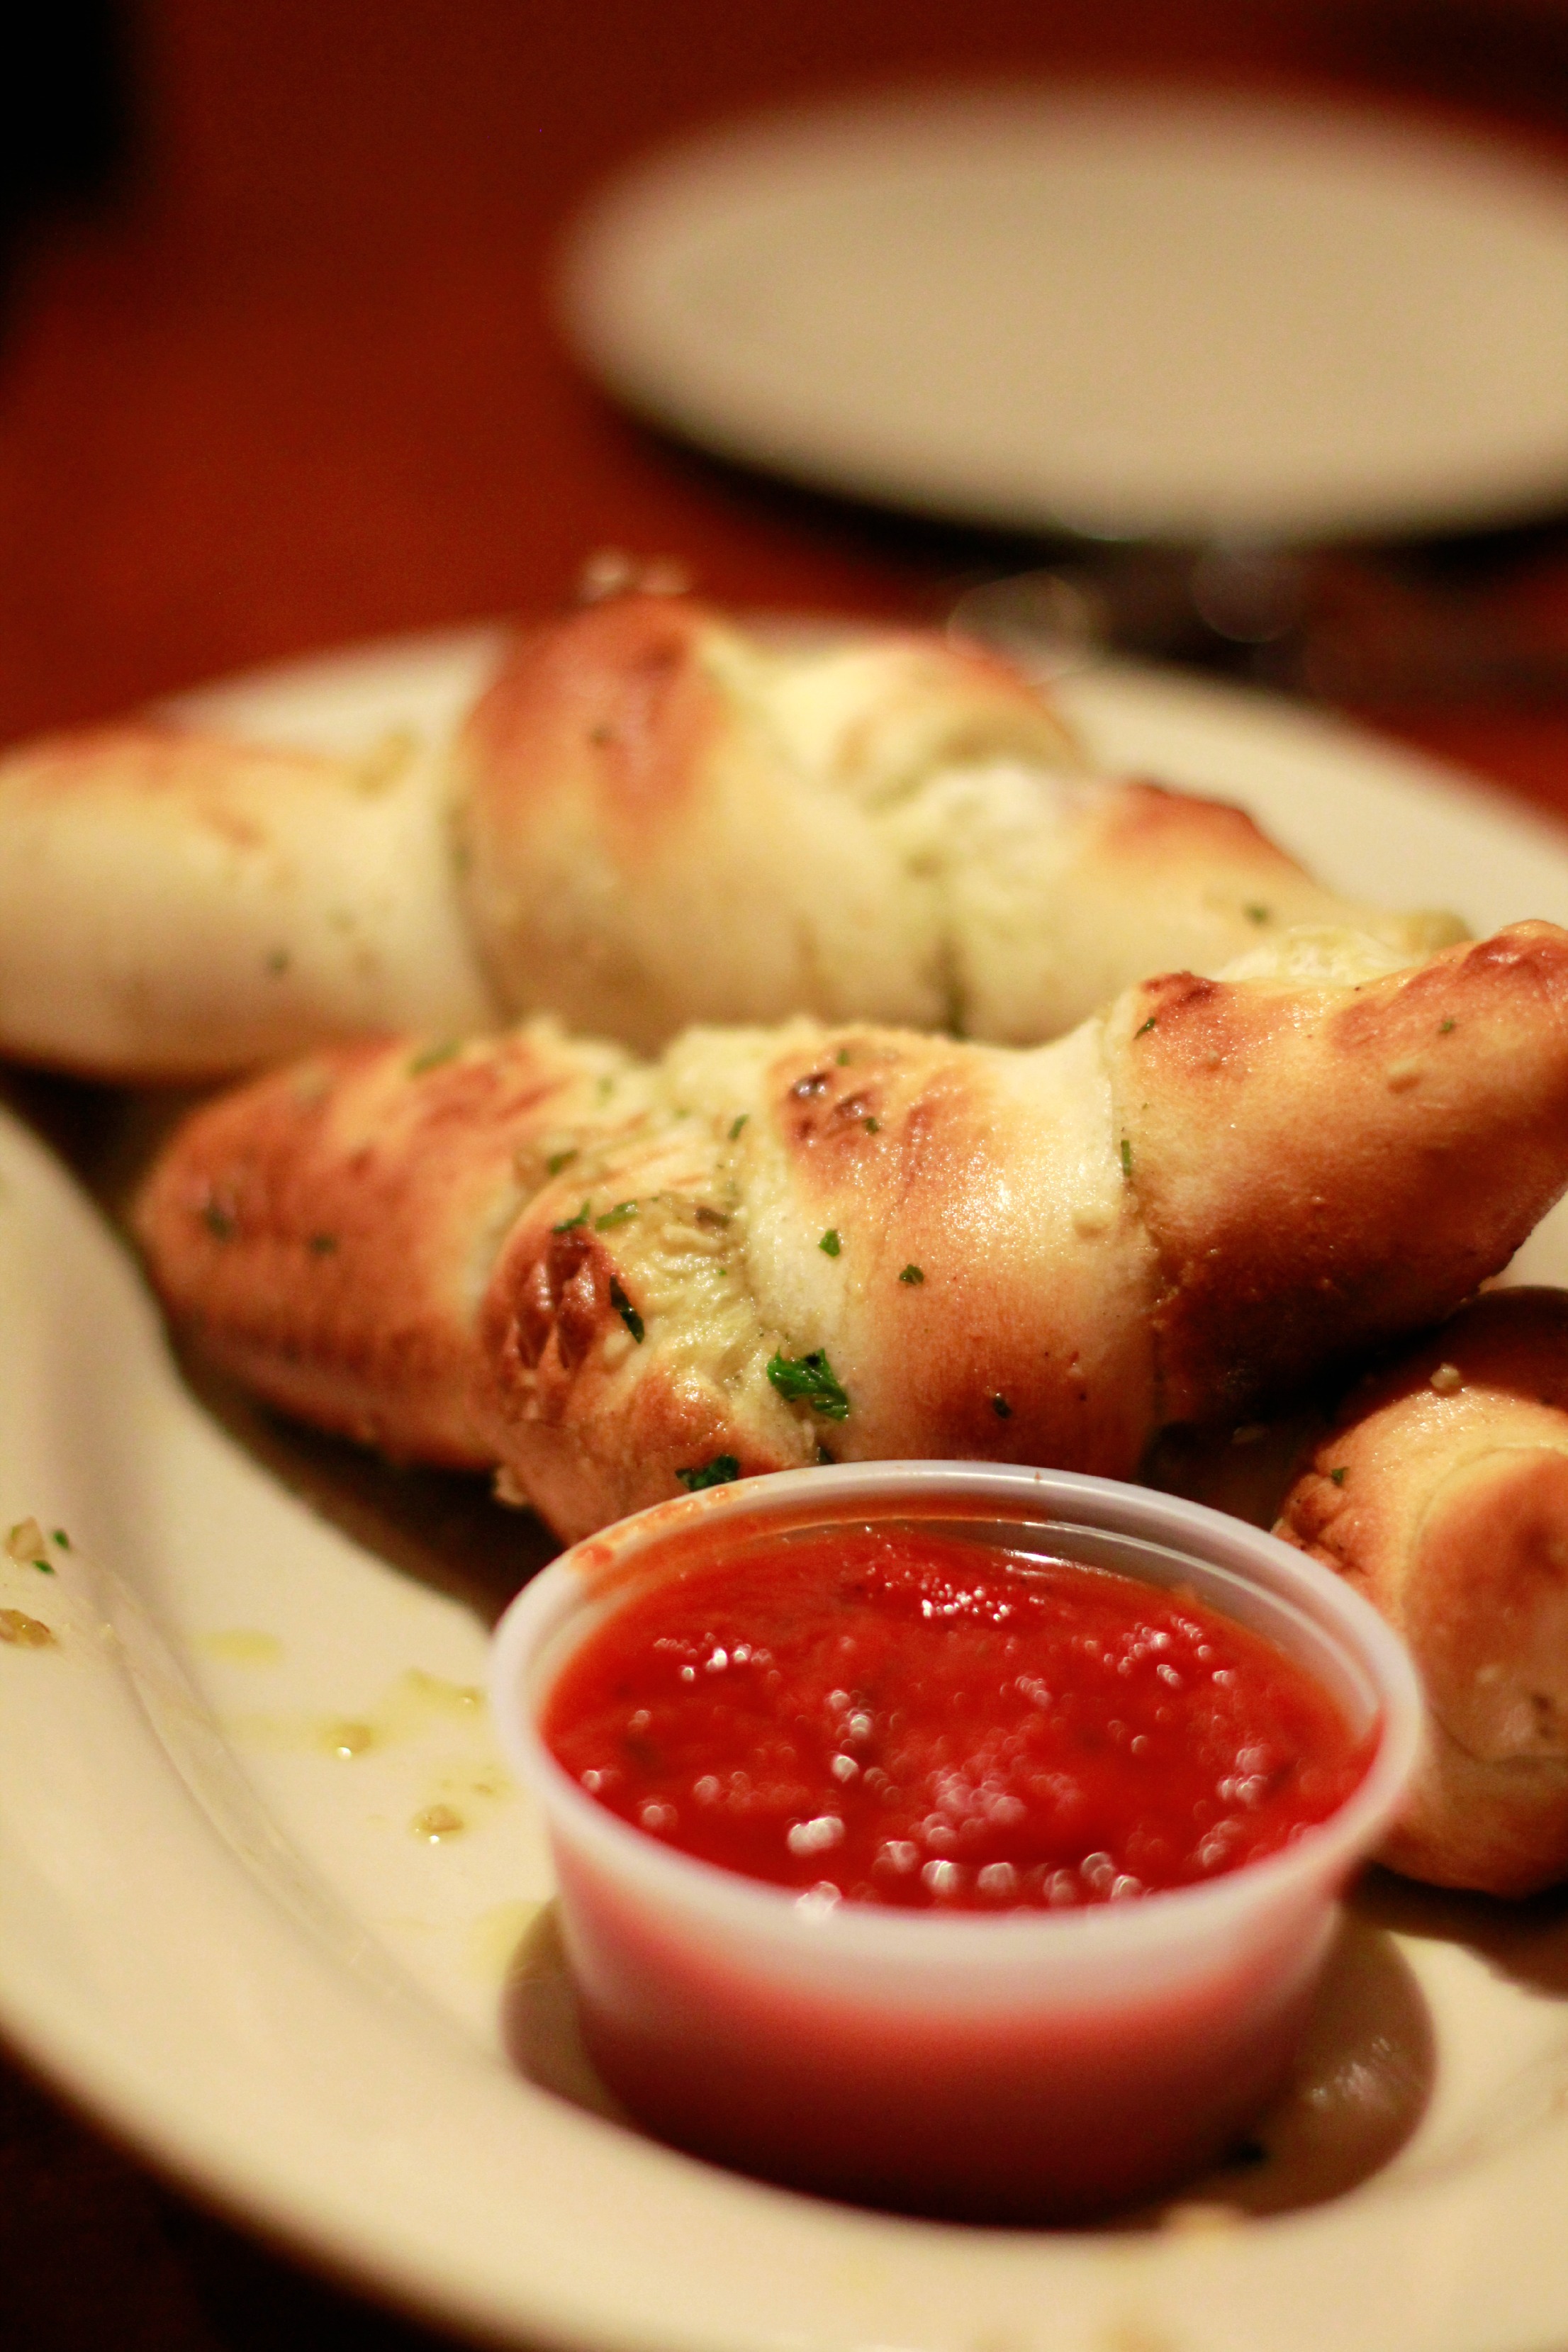 An order of Garlic Knots from Russo's NY Pizzeria